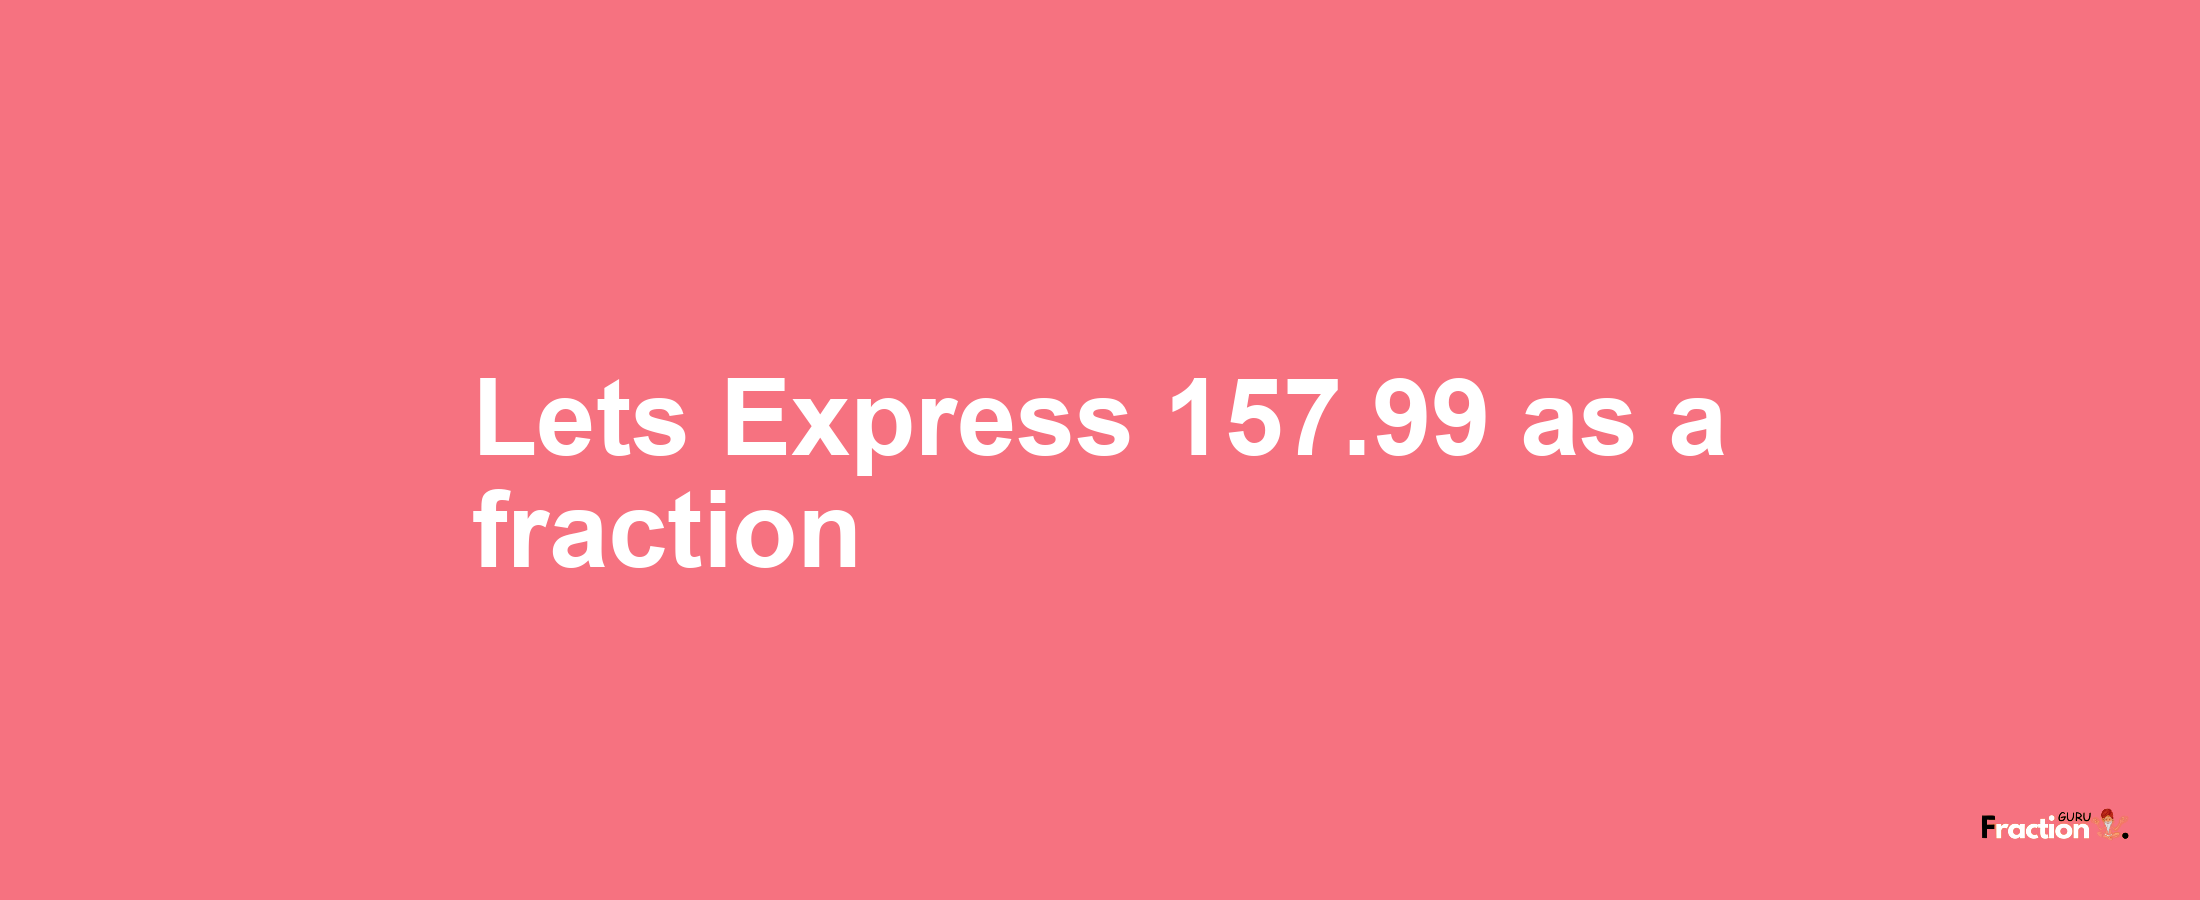 Lets Express 157.99 as afraction